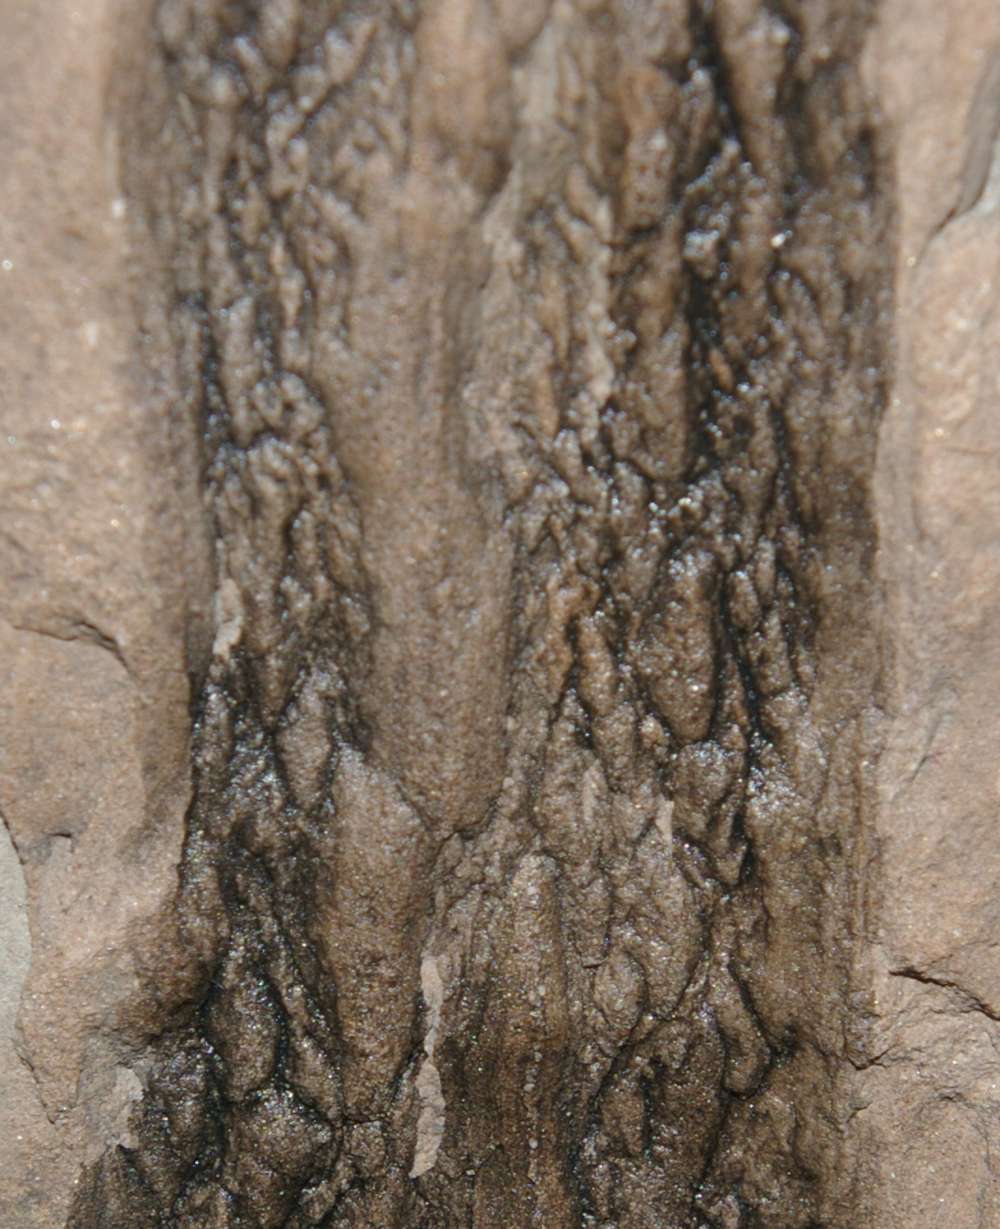 Ulodendron